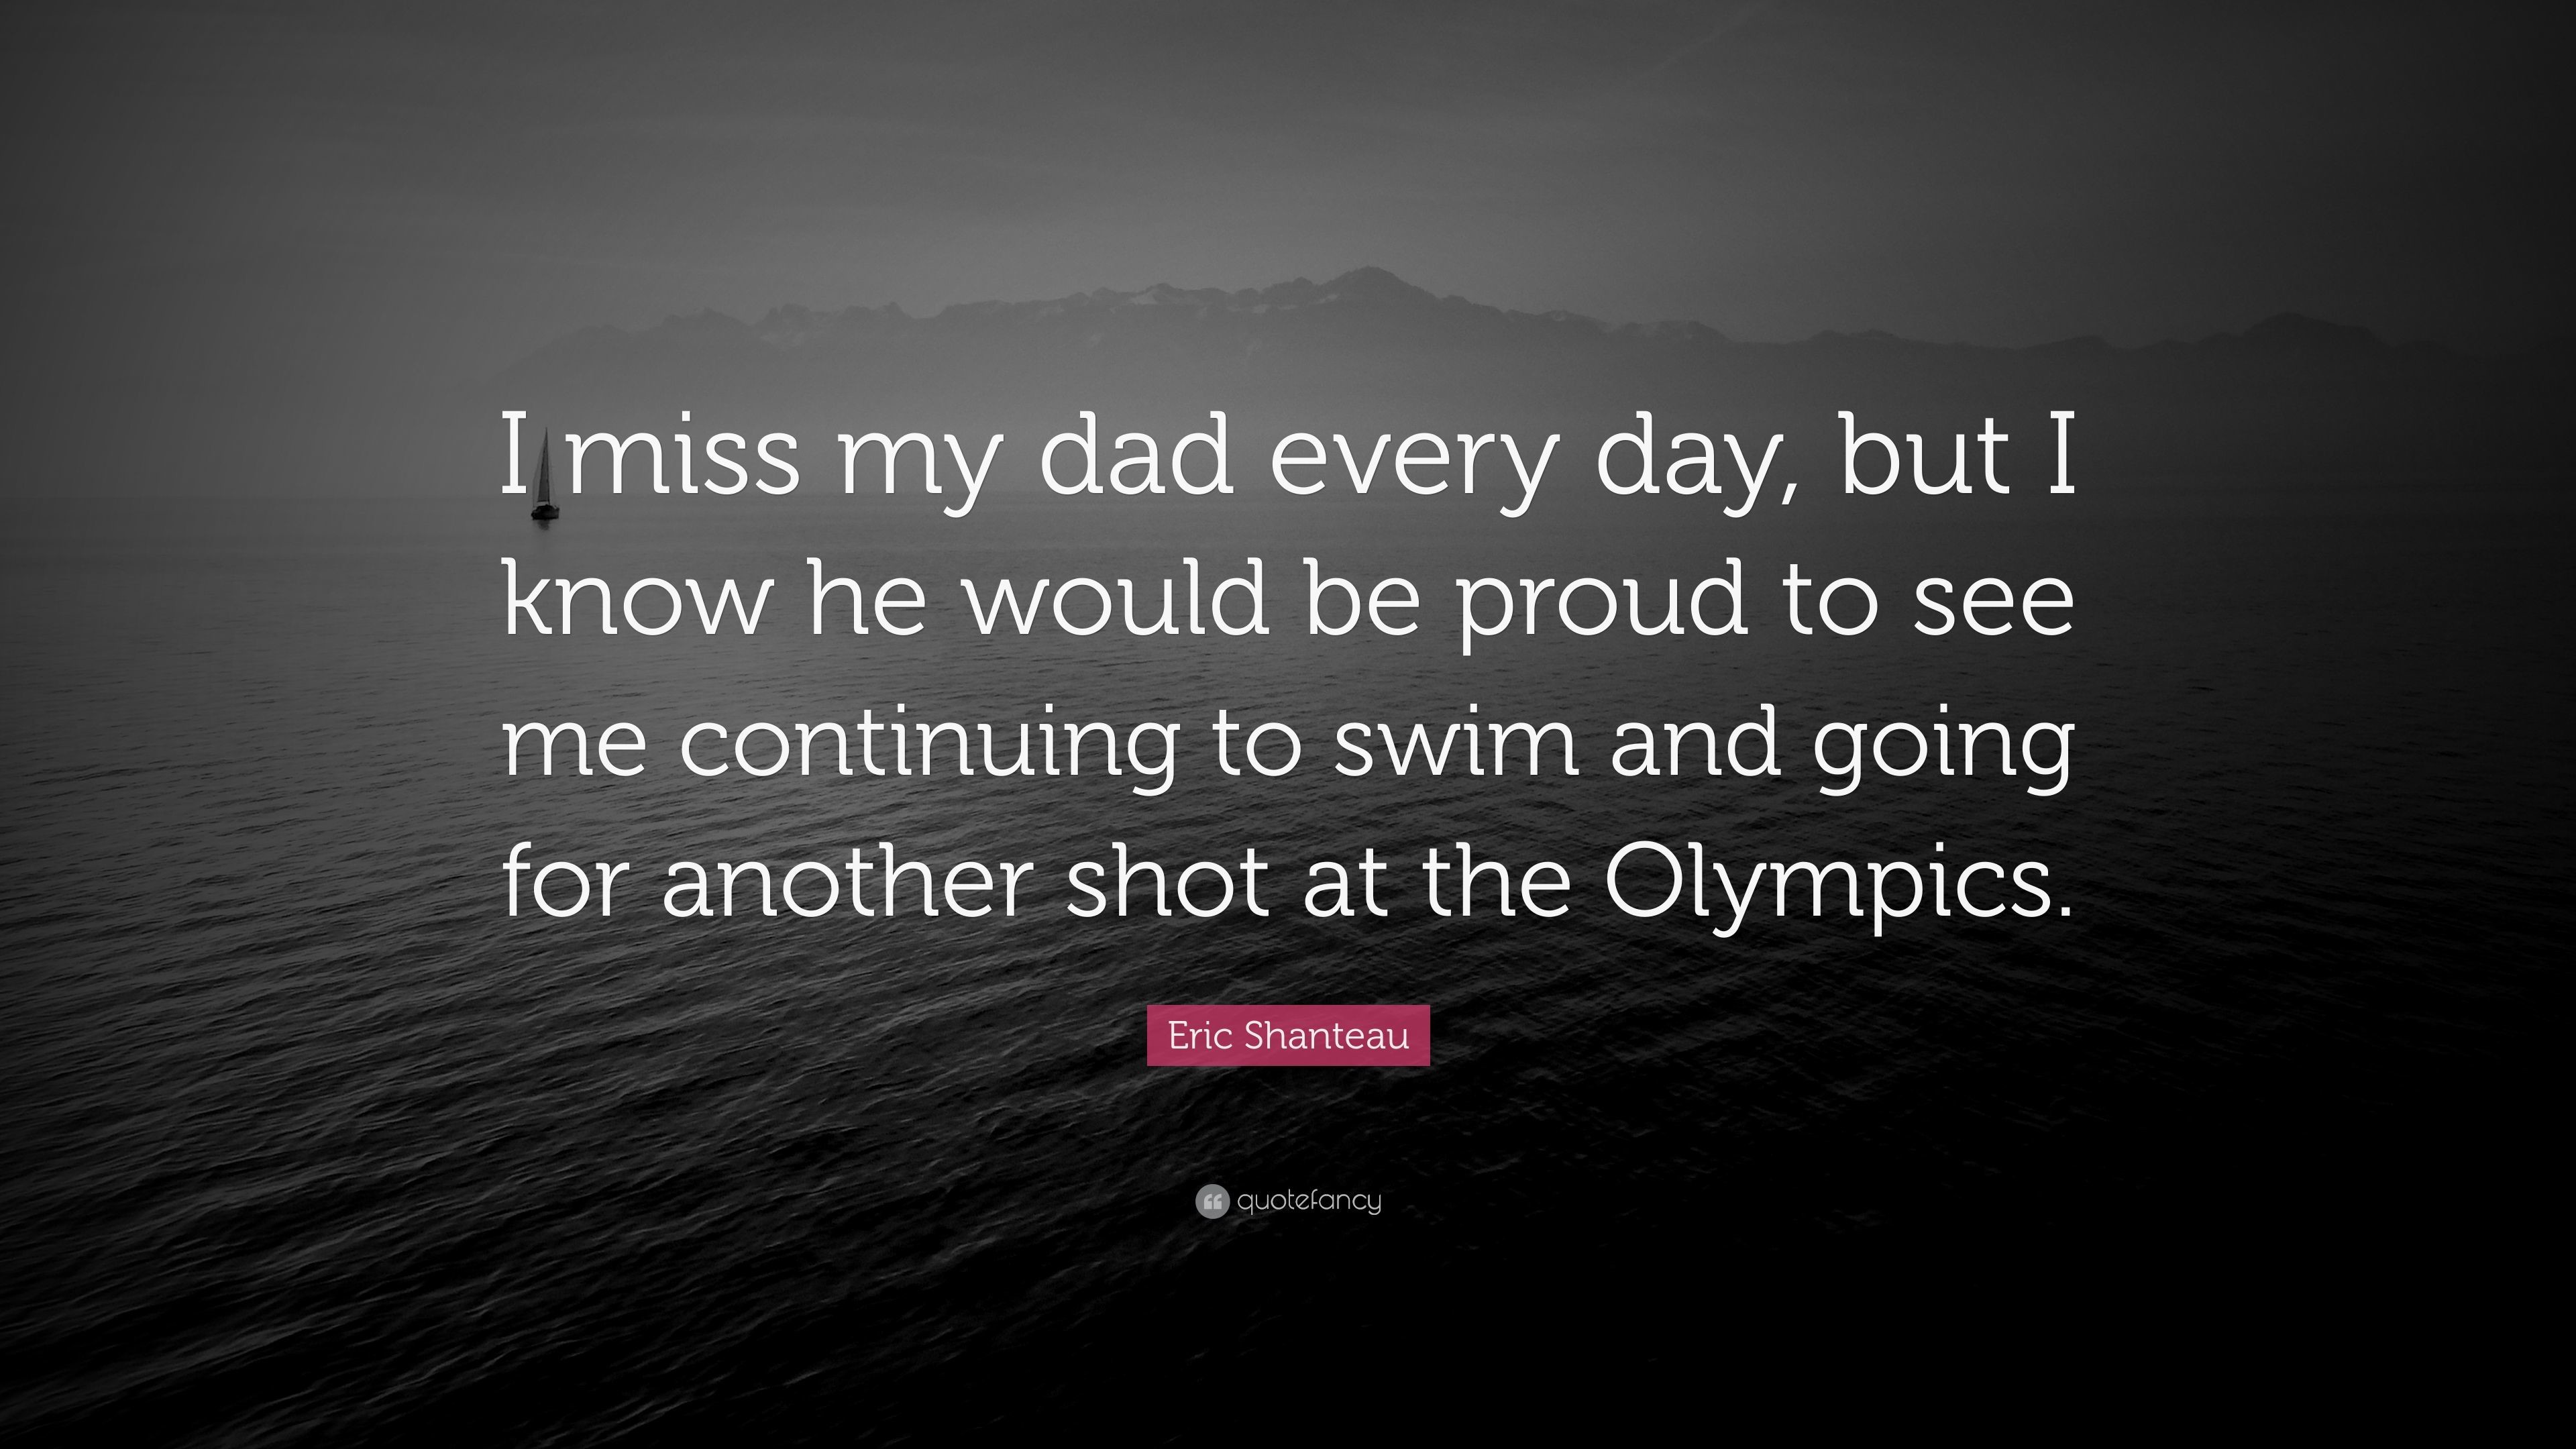 3840x2160 Eric Shanteau Quote: “I miss my dad every day, but I know he